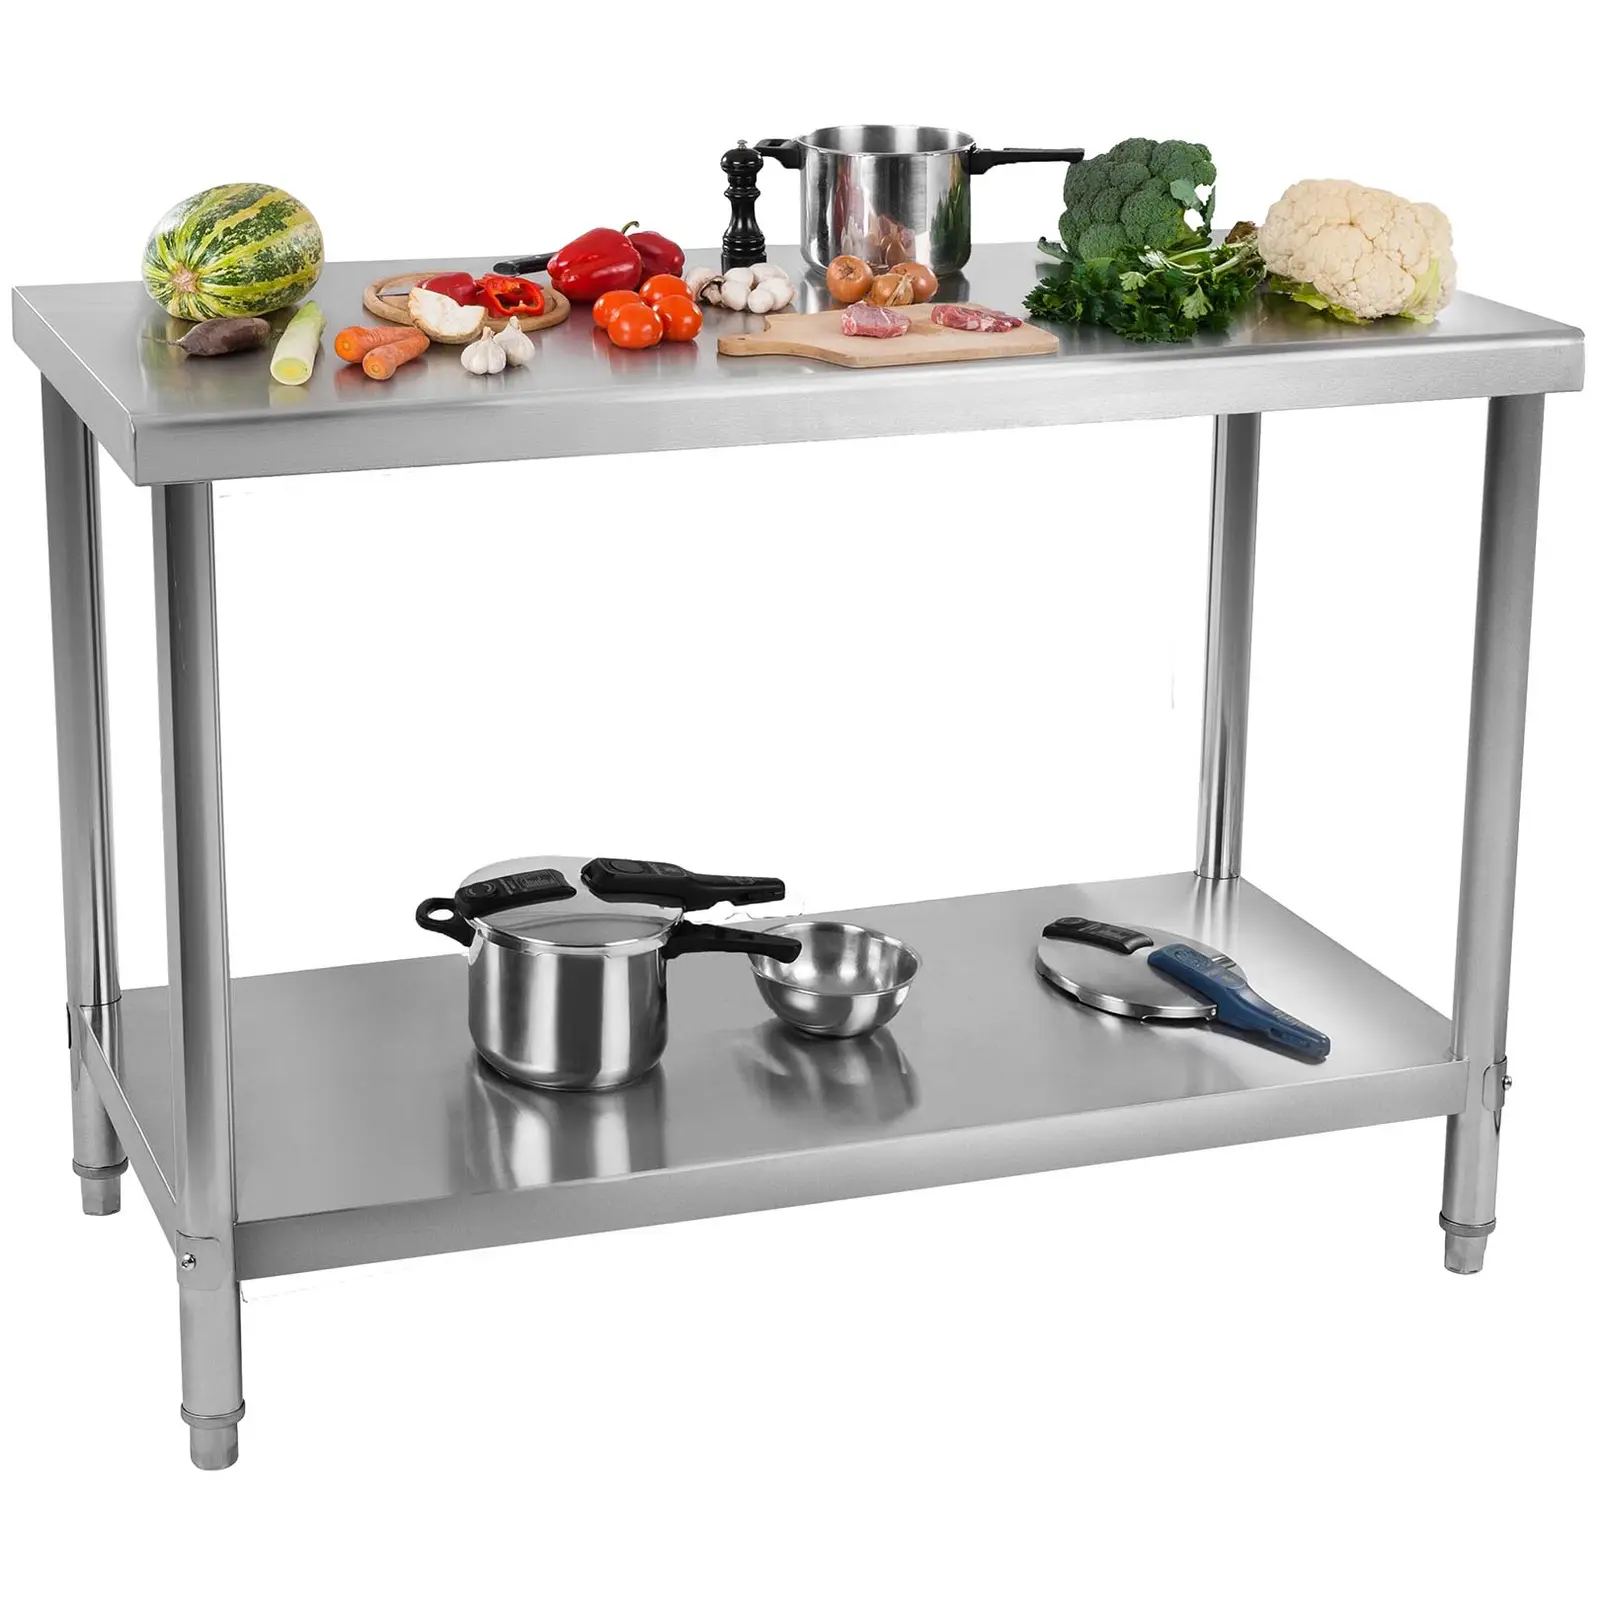 Stainless Steel Table - 100 x 70 cm - 120 kg carrying capacity